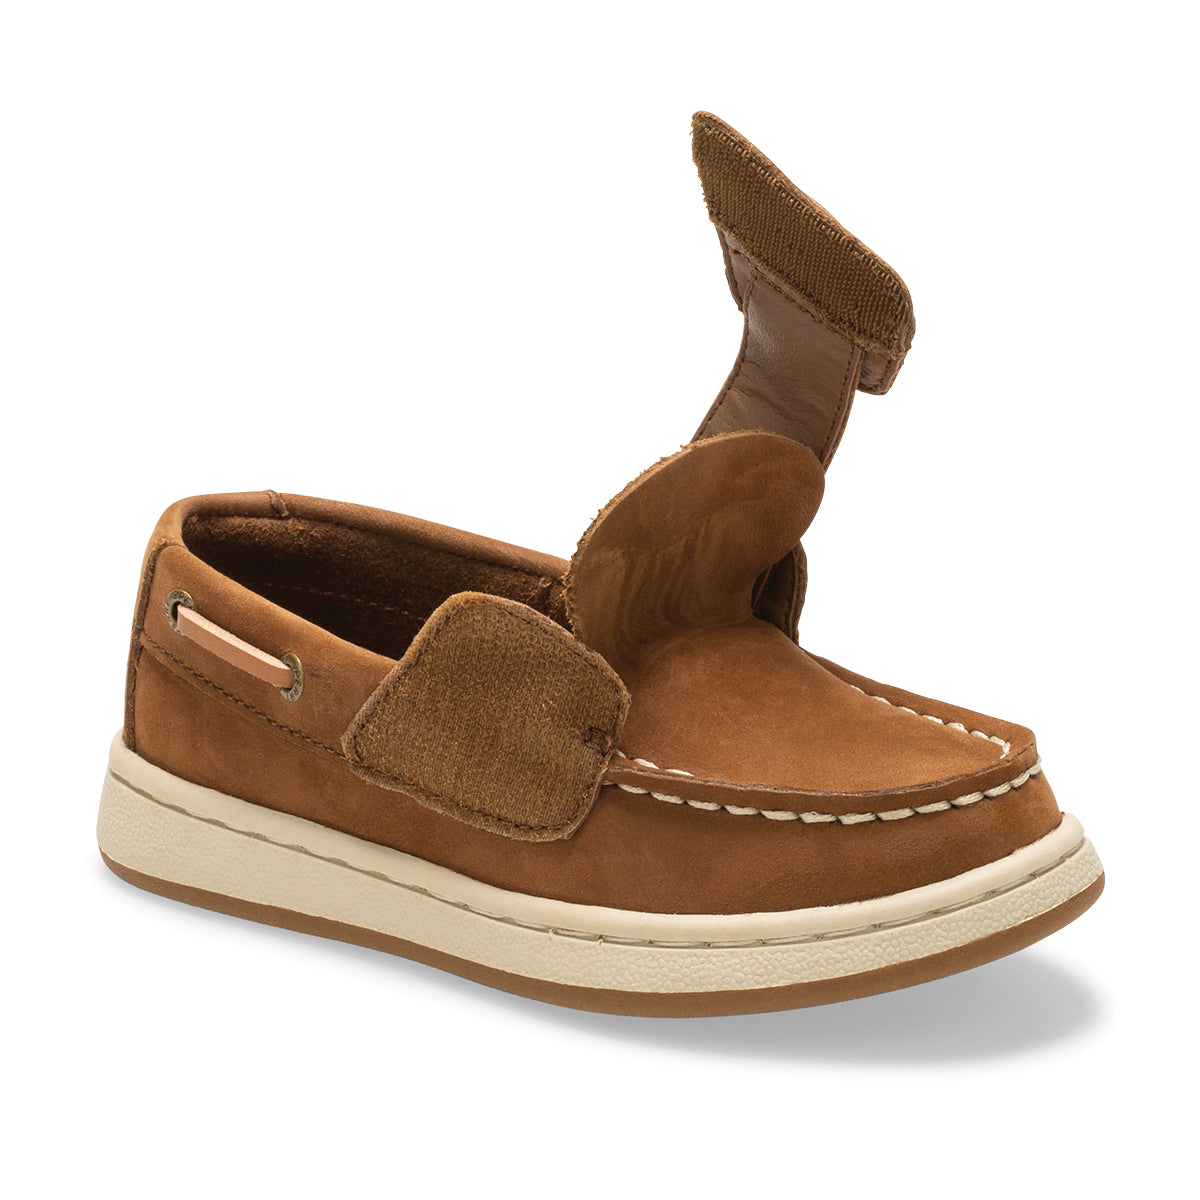 Sperry Cup II Jr Boat Shoe - Brown Leather